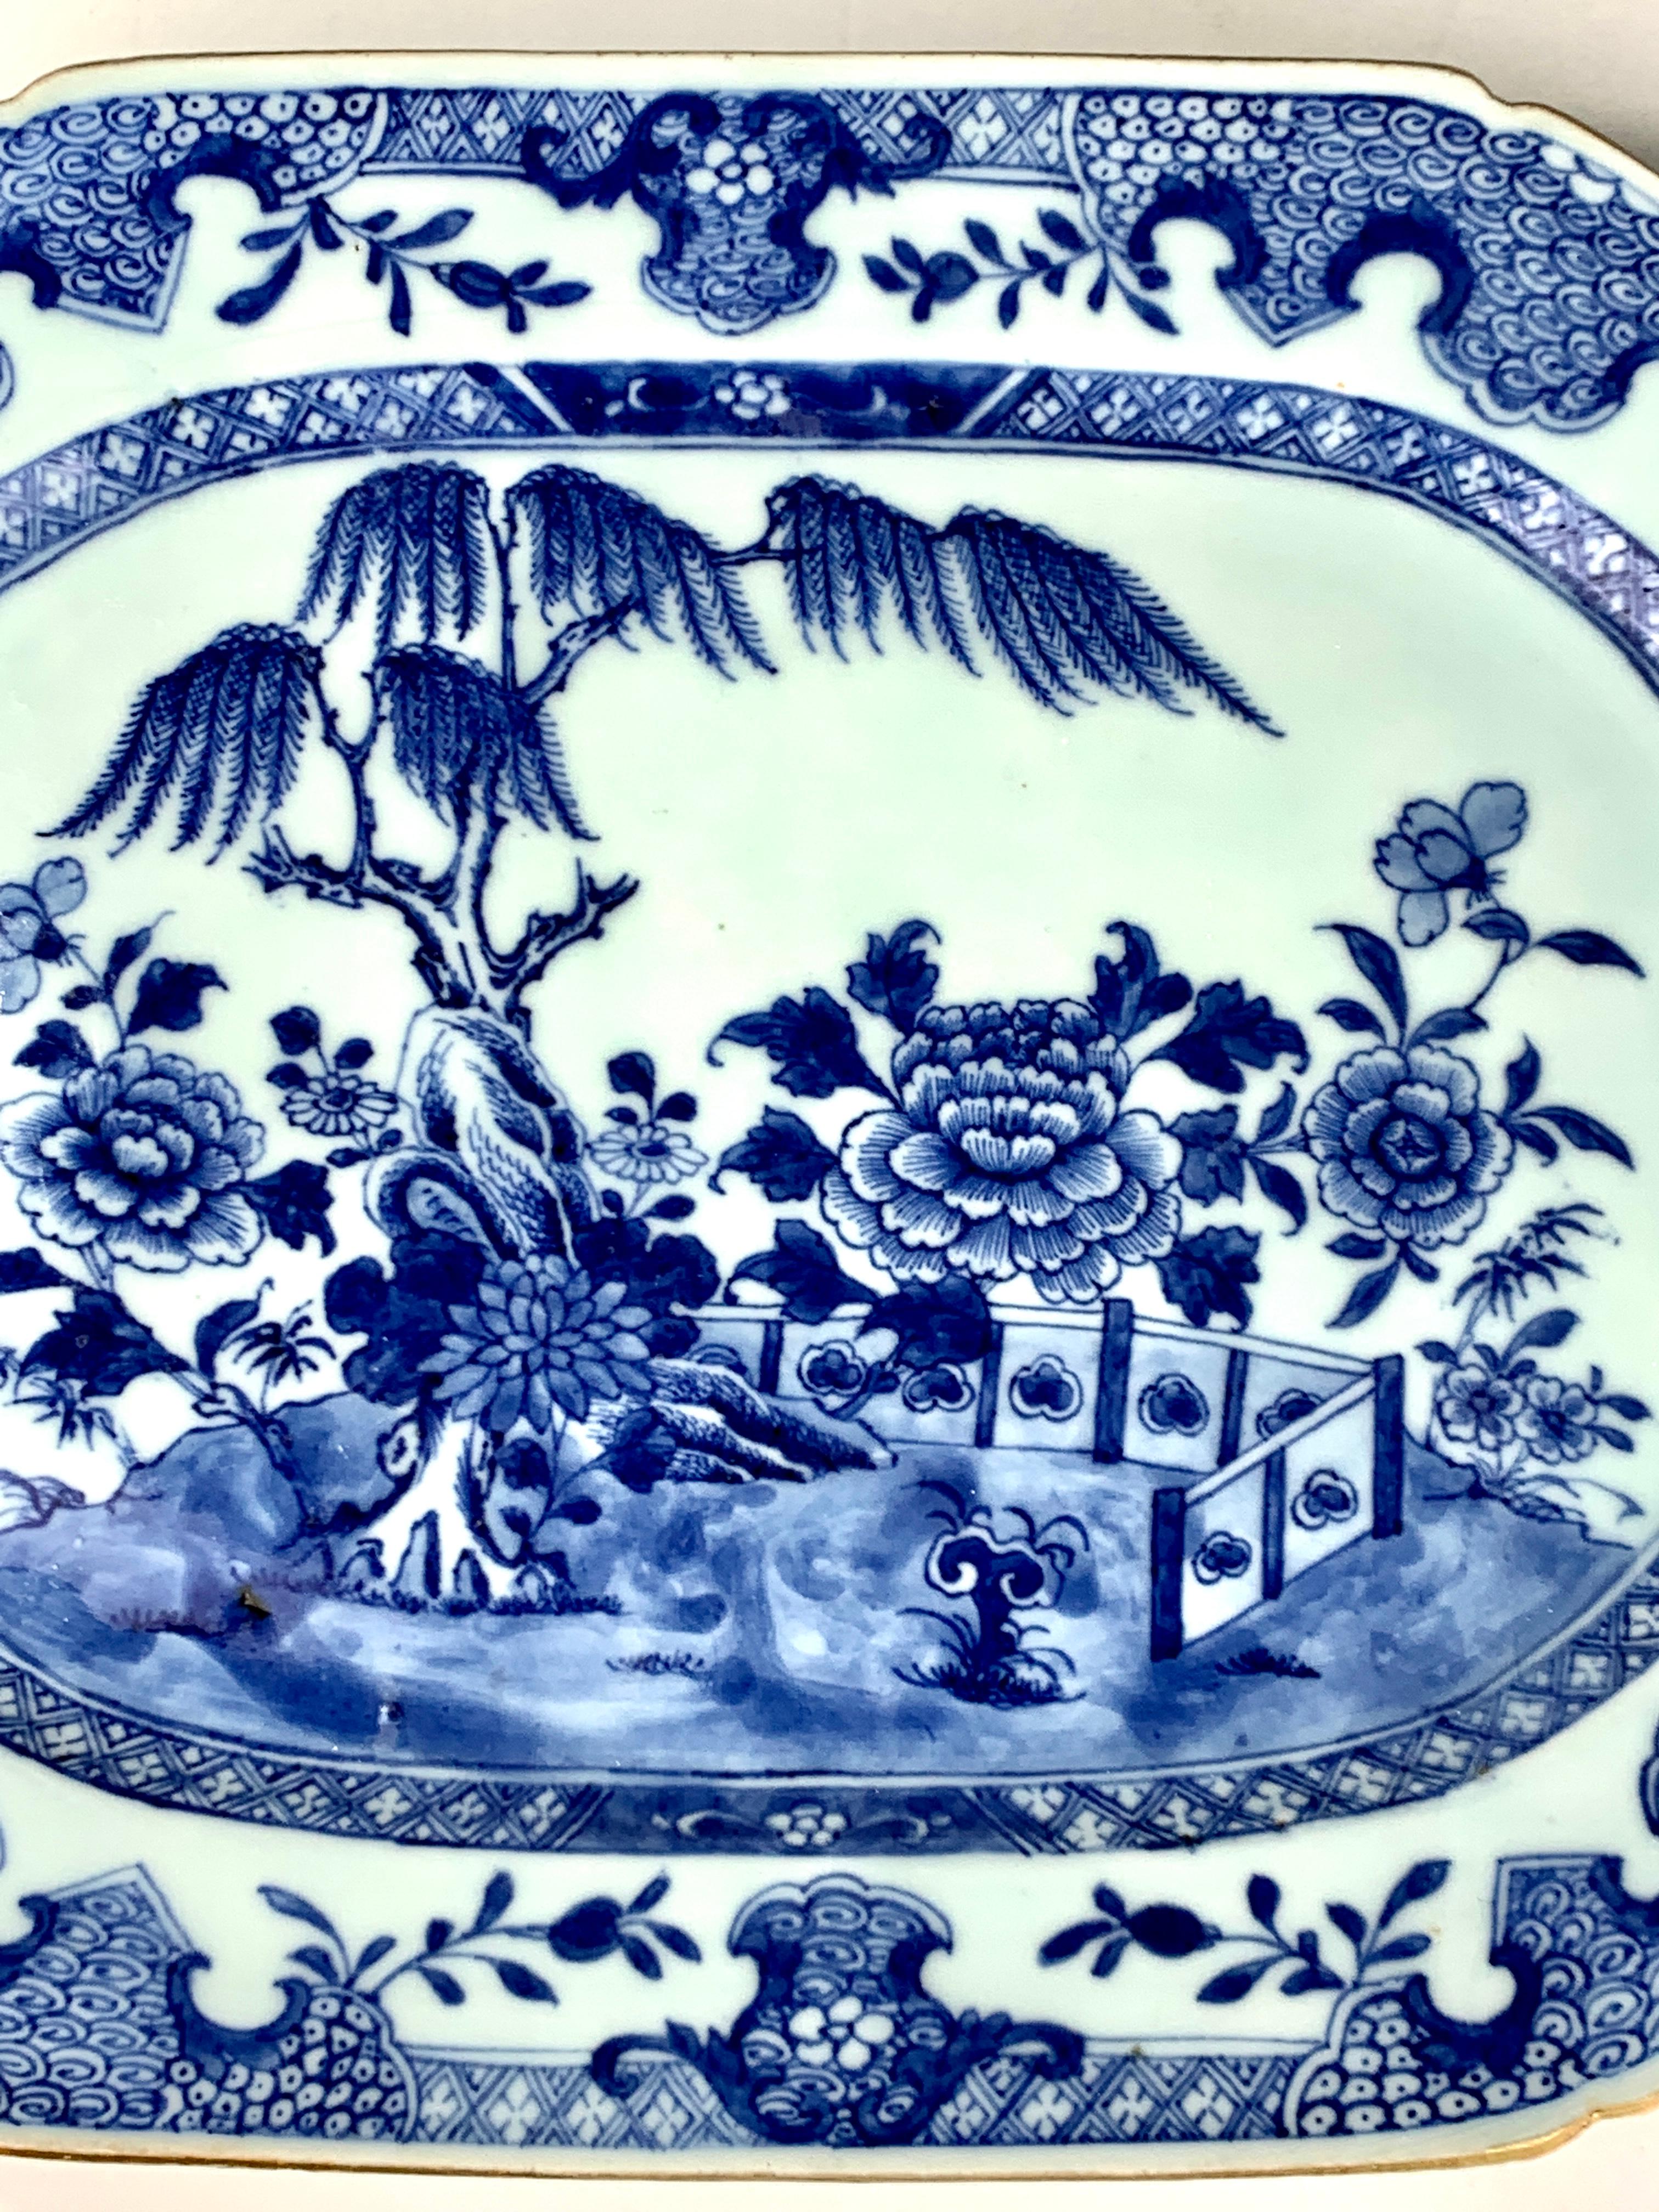 This exquisite Chinese blue and white porcelain platter was hand-painted in the Qianlong dynasty in the 18th century. It has the timeless appeal of beautiful flowers blooming in a garden. We see a fence, willow tree, rockwork, and large peonies,